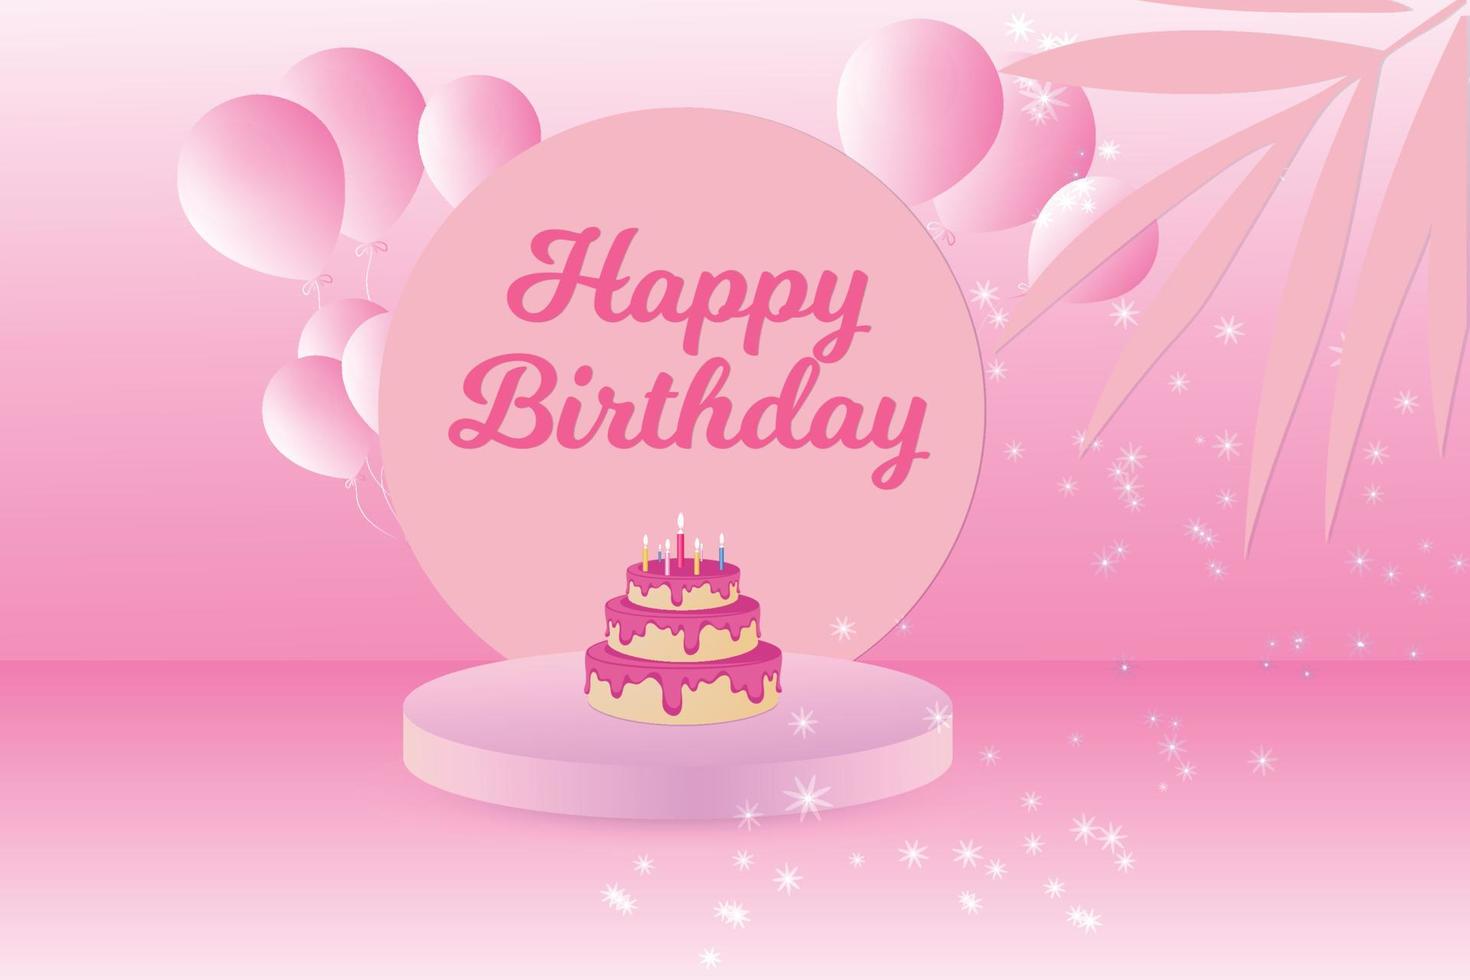 Happy birthday Pink background design with balloons. vector